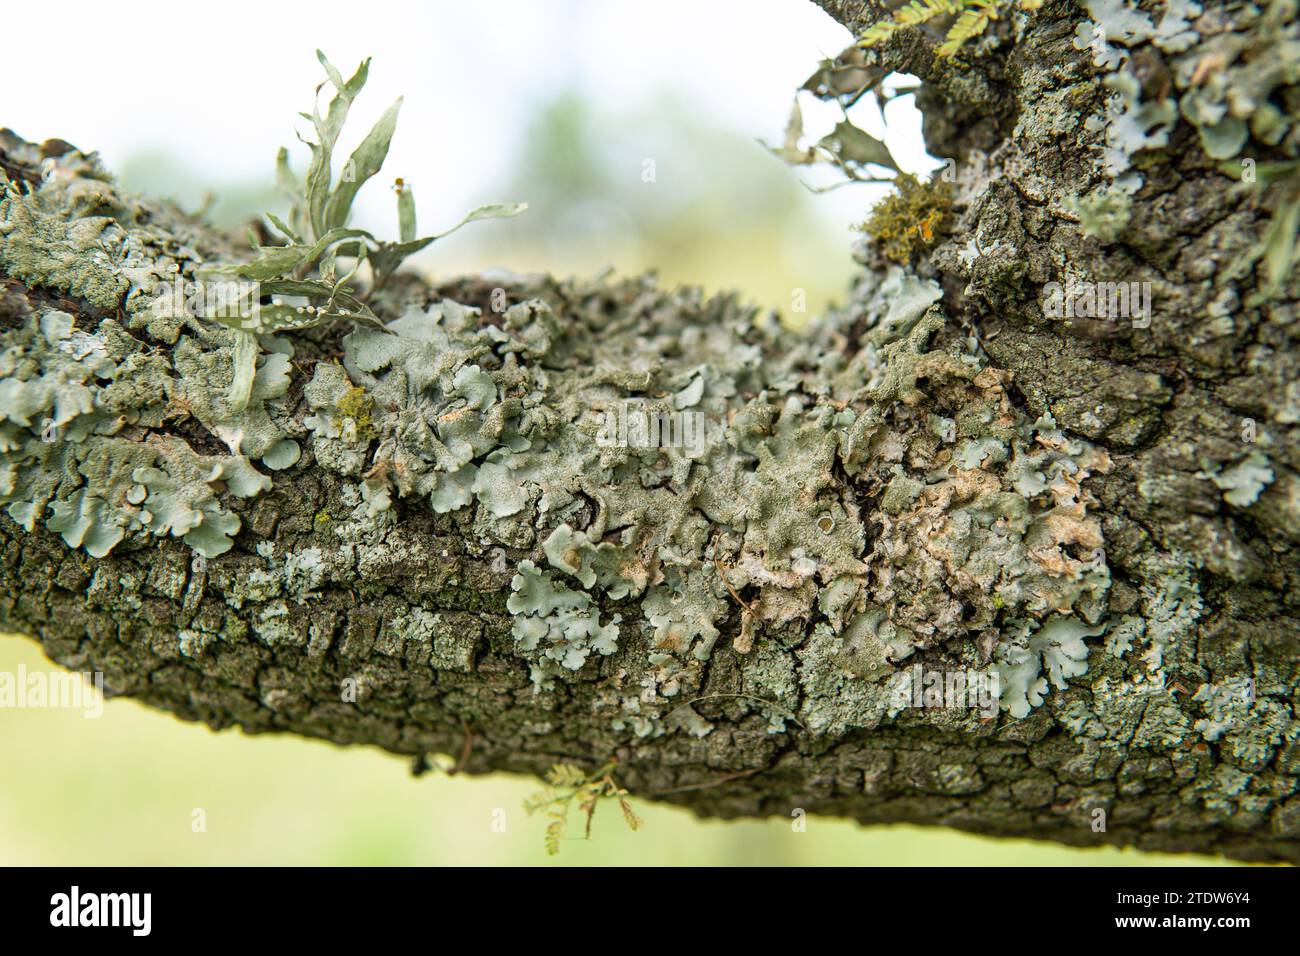 different types of lichens on tree bark Stock Photo